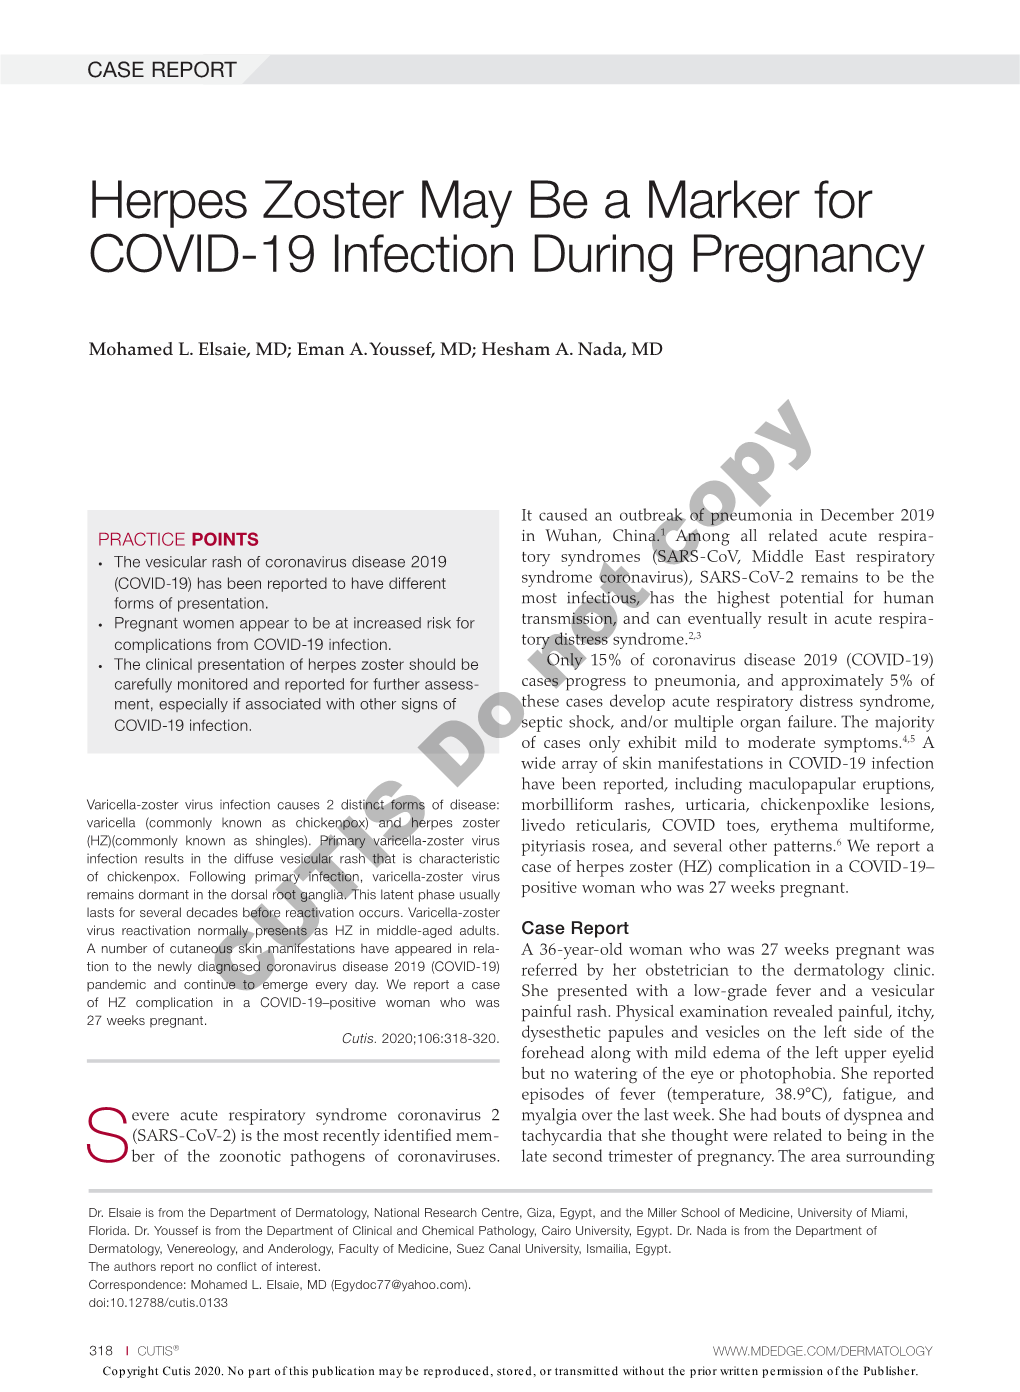 Herpes Zoster May Be a Marker for COVID-19 Infection During Pregnancy